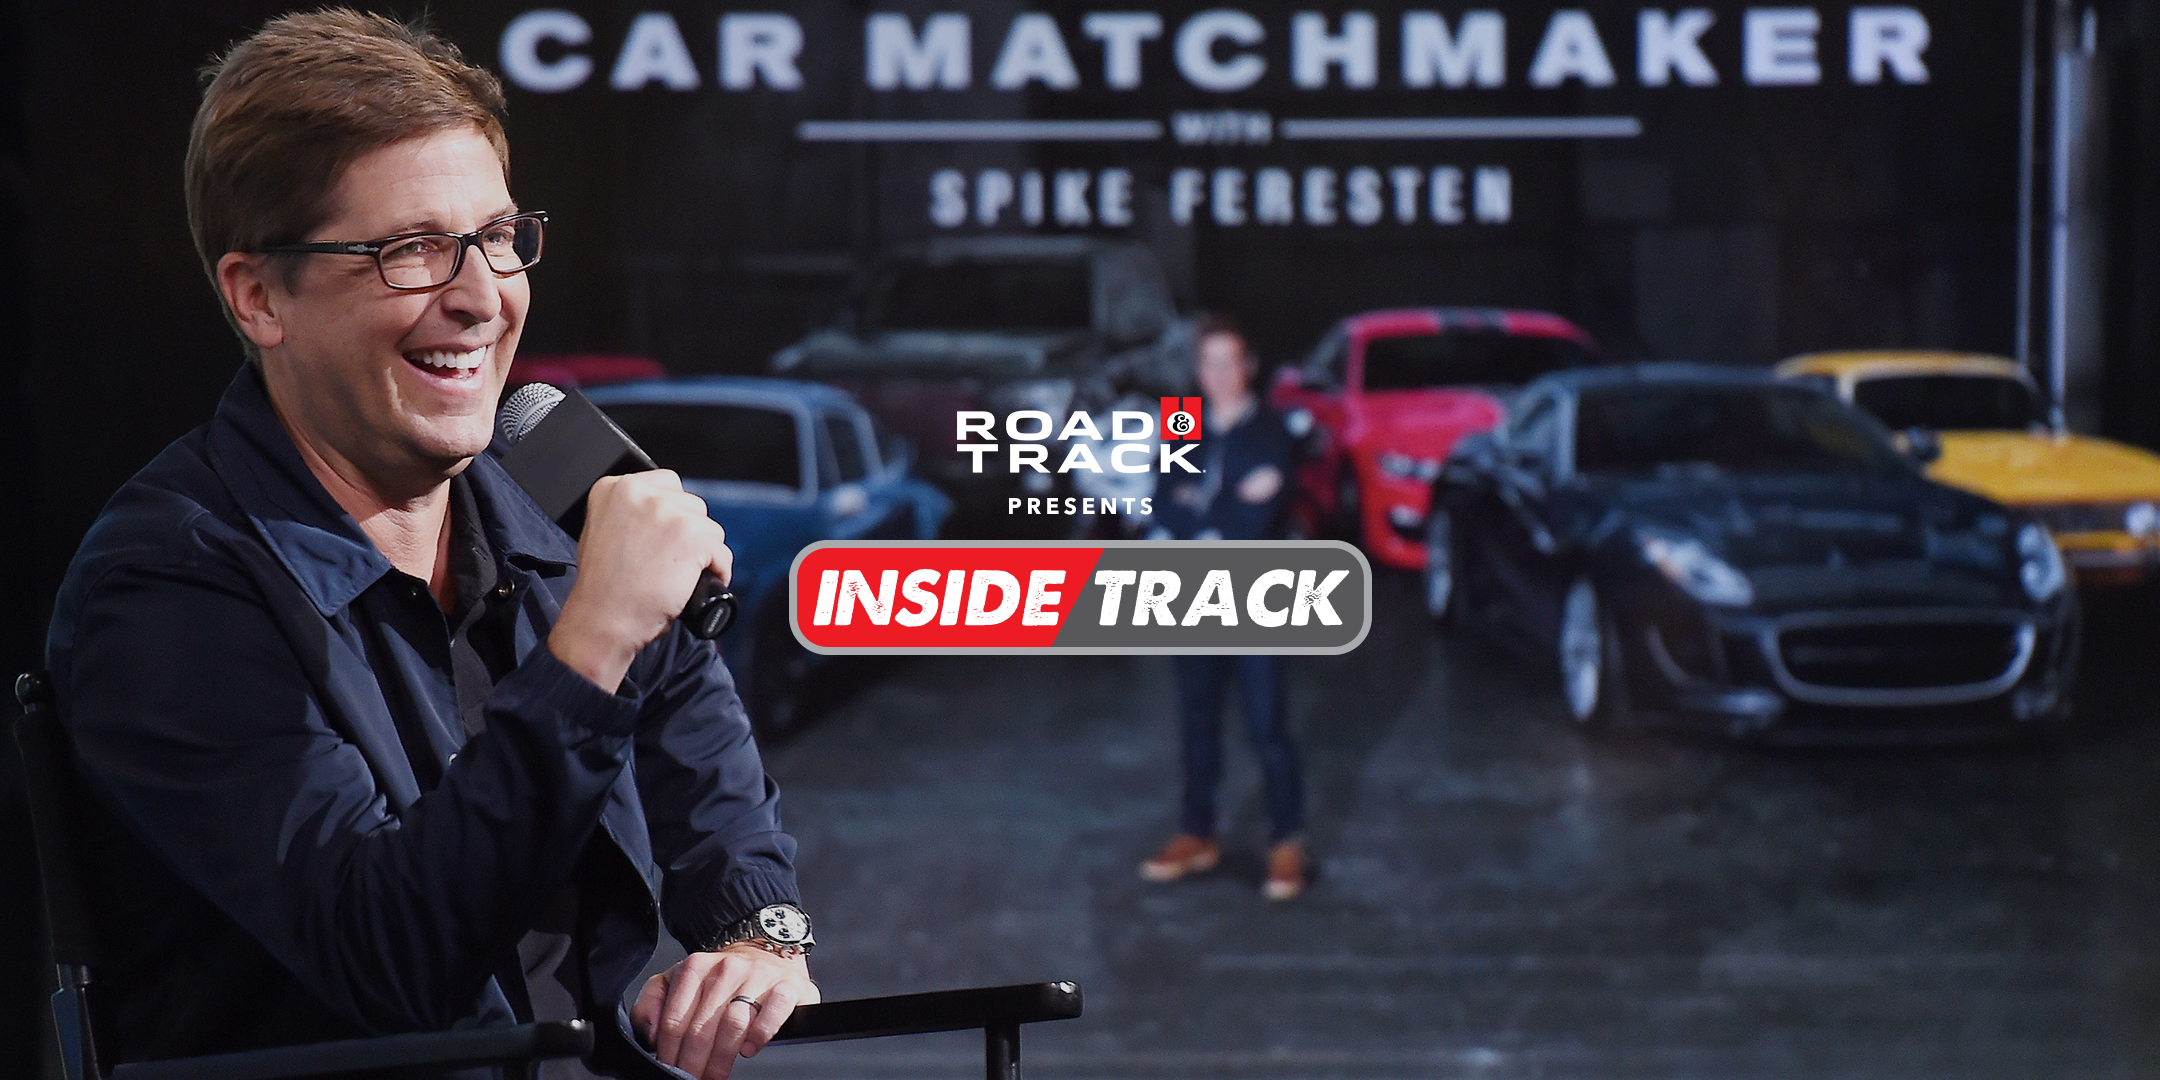 Join Car-Loving Comedy Writer and Podcast Host Spike Feresten on the Next Episode of Inside Track